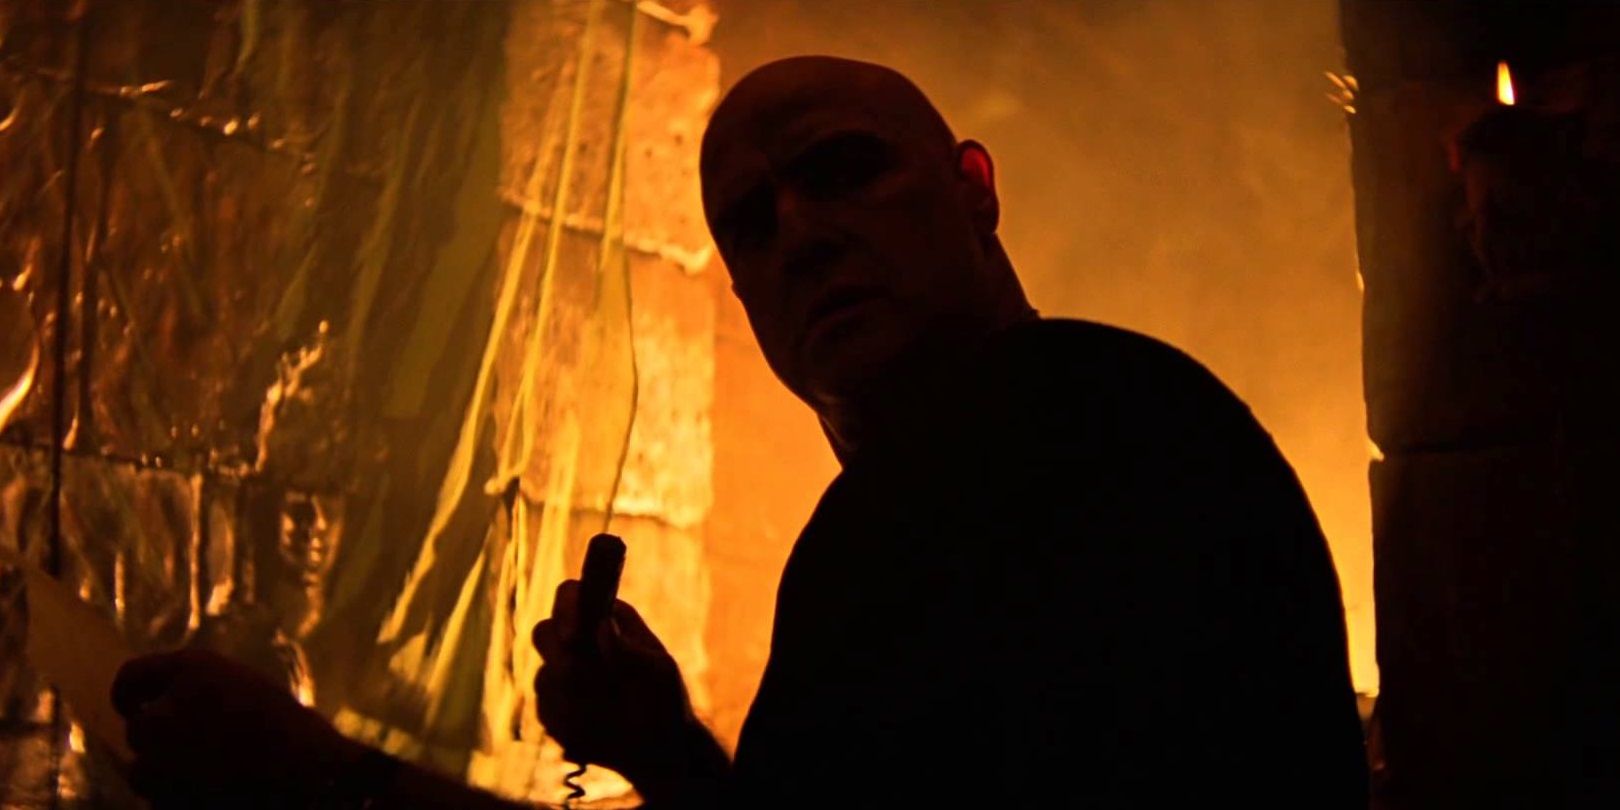 Colonel Kurtz hides in the shadows of his temple in Apocalypse Now